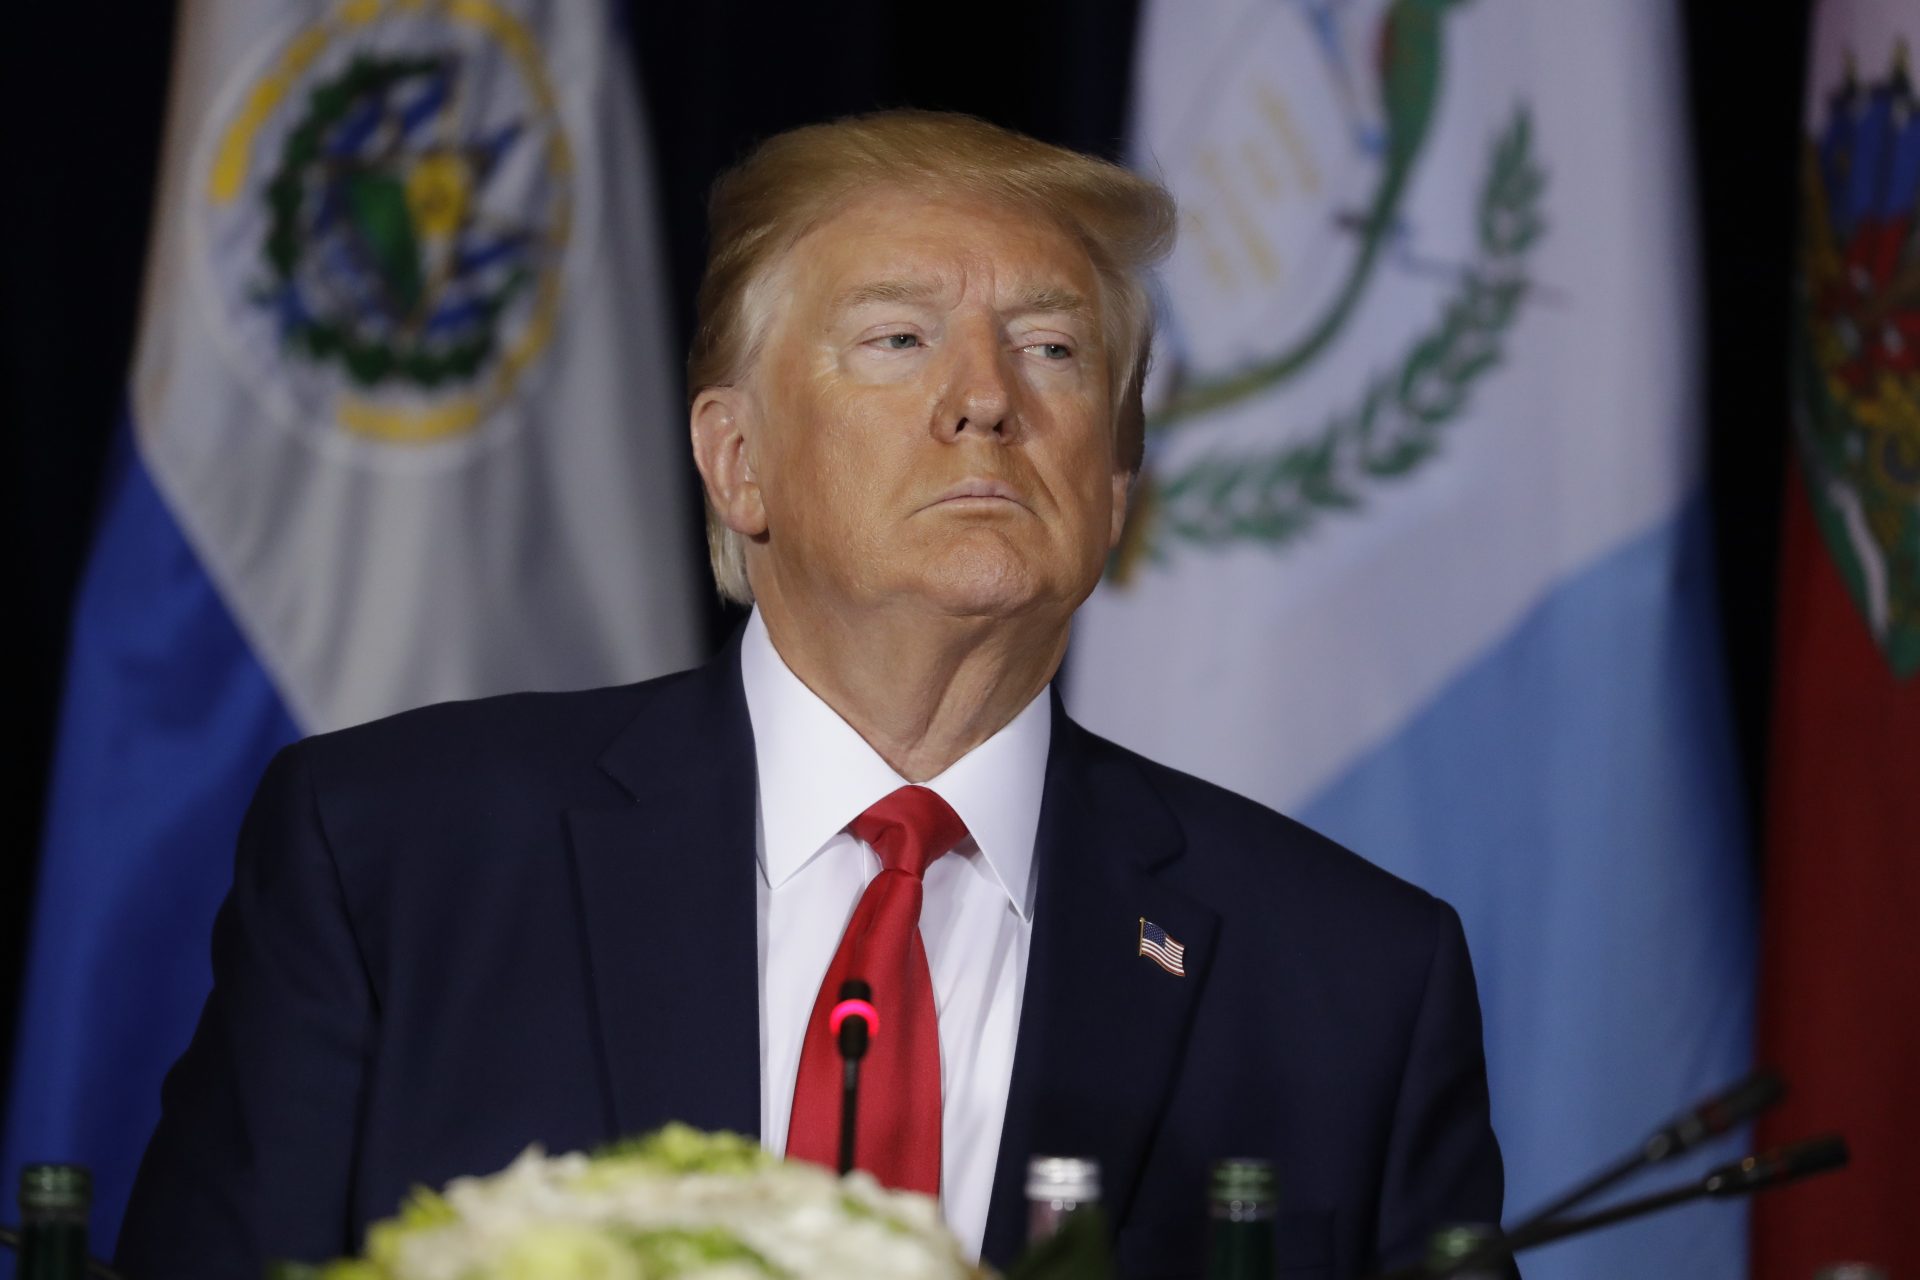 President Donald Trump attends a multilateral meeting on Venezuela at the InterContinental New York Barclay hotel during the United Nations General Assembly, Wednesday, Sept. 25, 2019, in New York.